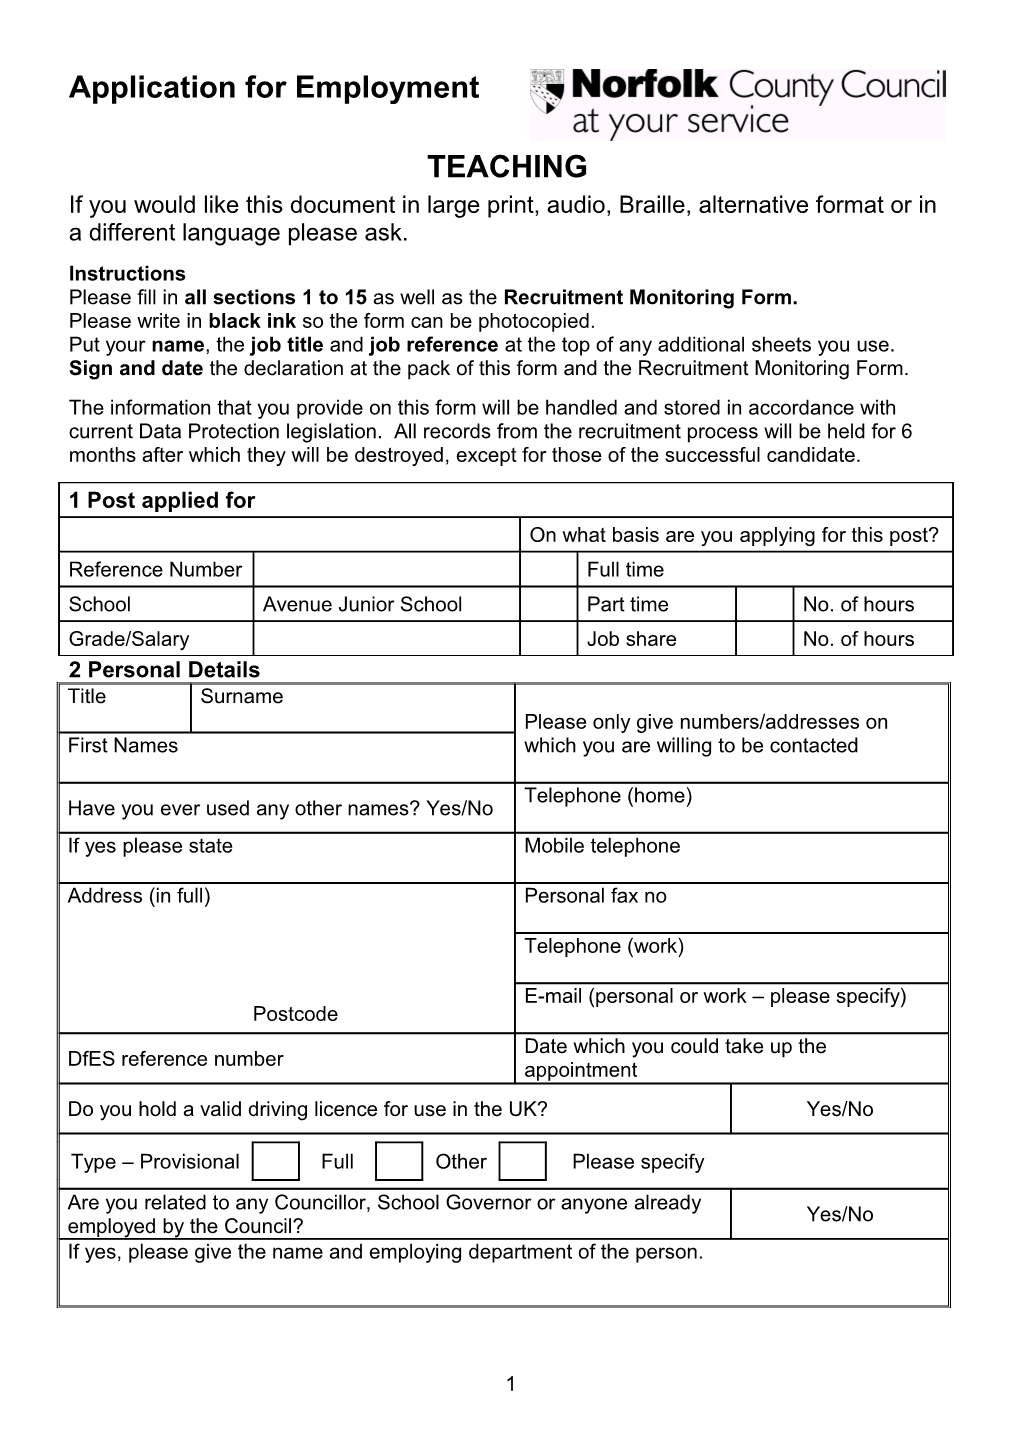 Please Fill in All Sections 1 to 15 As Well As the Recruitment Monitoring Form